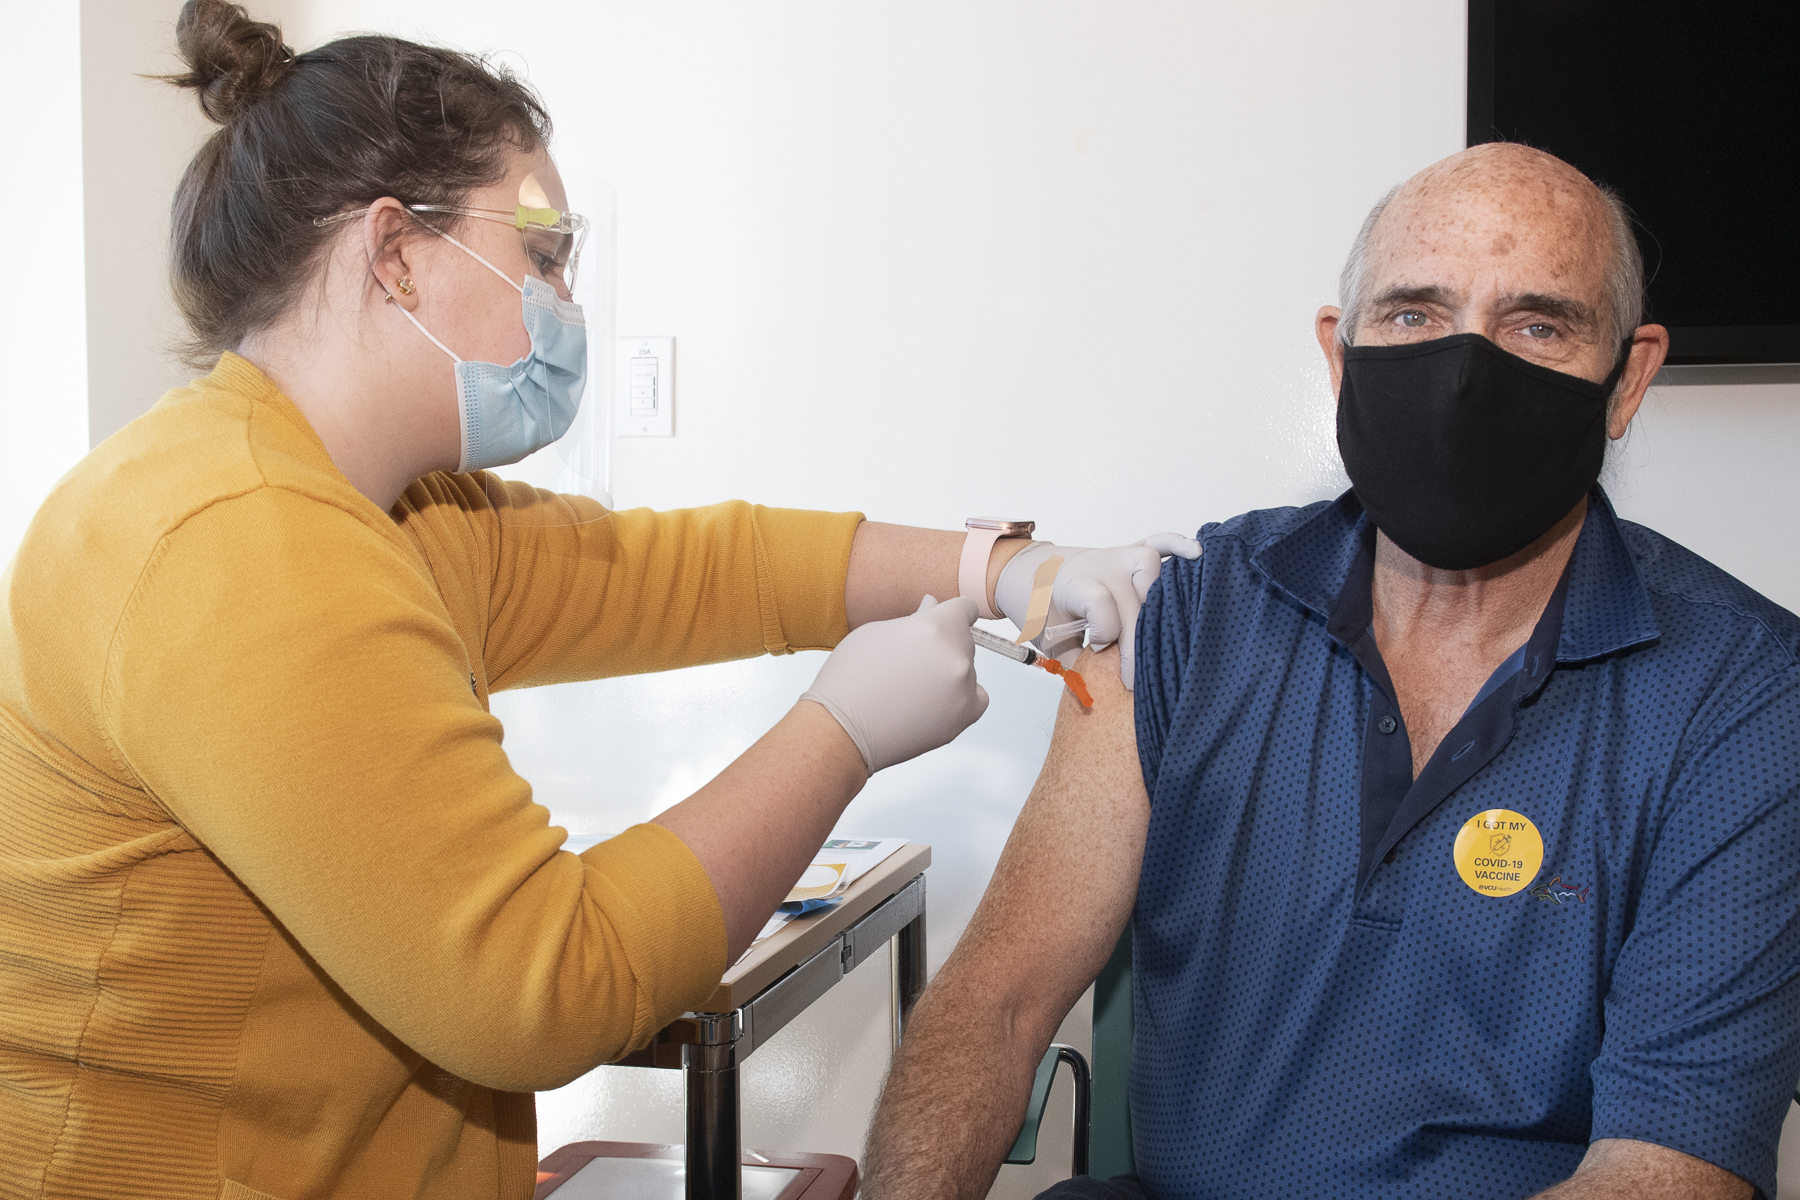 An older adult looks toward the camera while a student vaccinates him against COVID-19 at the VCU Health Hub at 25th.